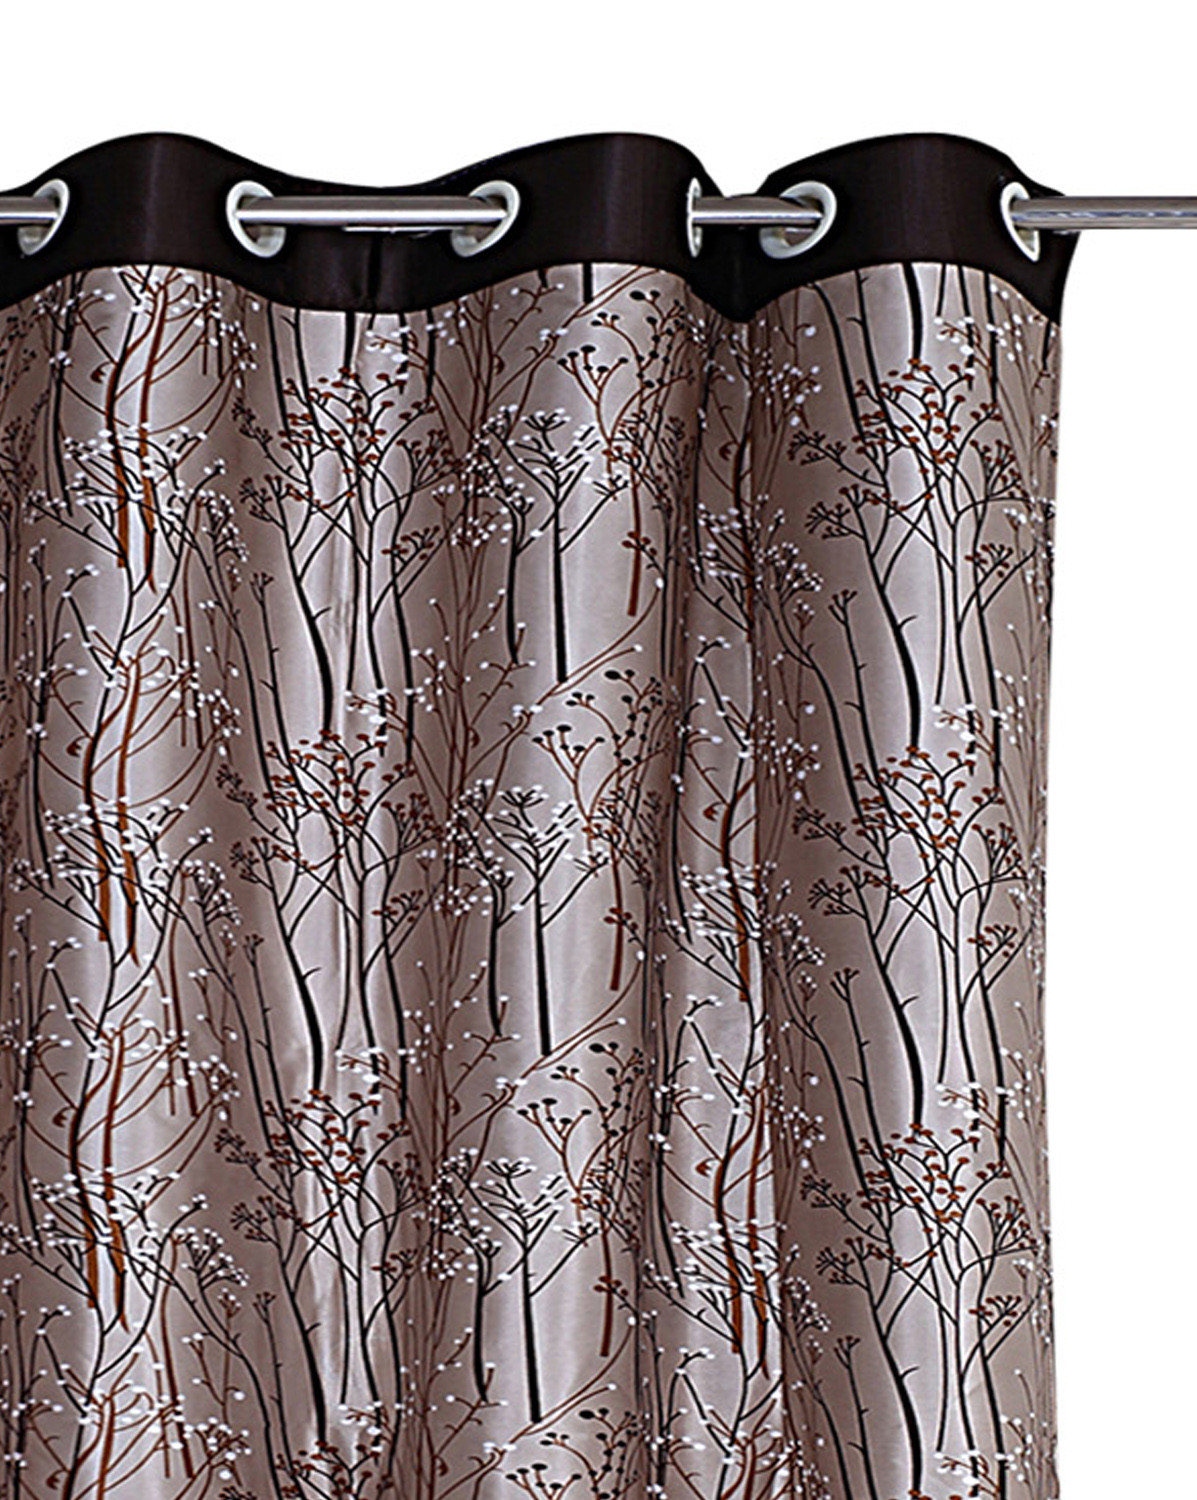 Kuber Industries Polyester Decorative 5 Feet Window Curtain|Tree Branches Print Darkening Blackout|Drapes Curatin With 8 Eyelet For Home & Office (Coffee)